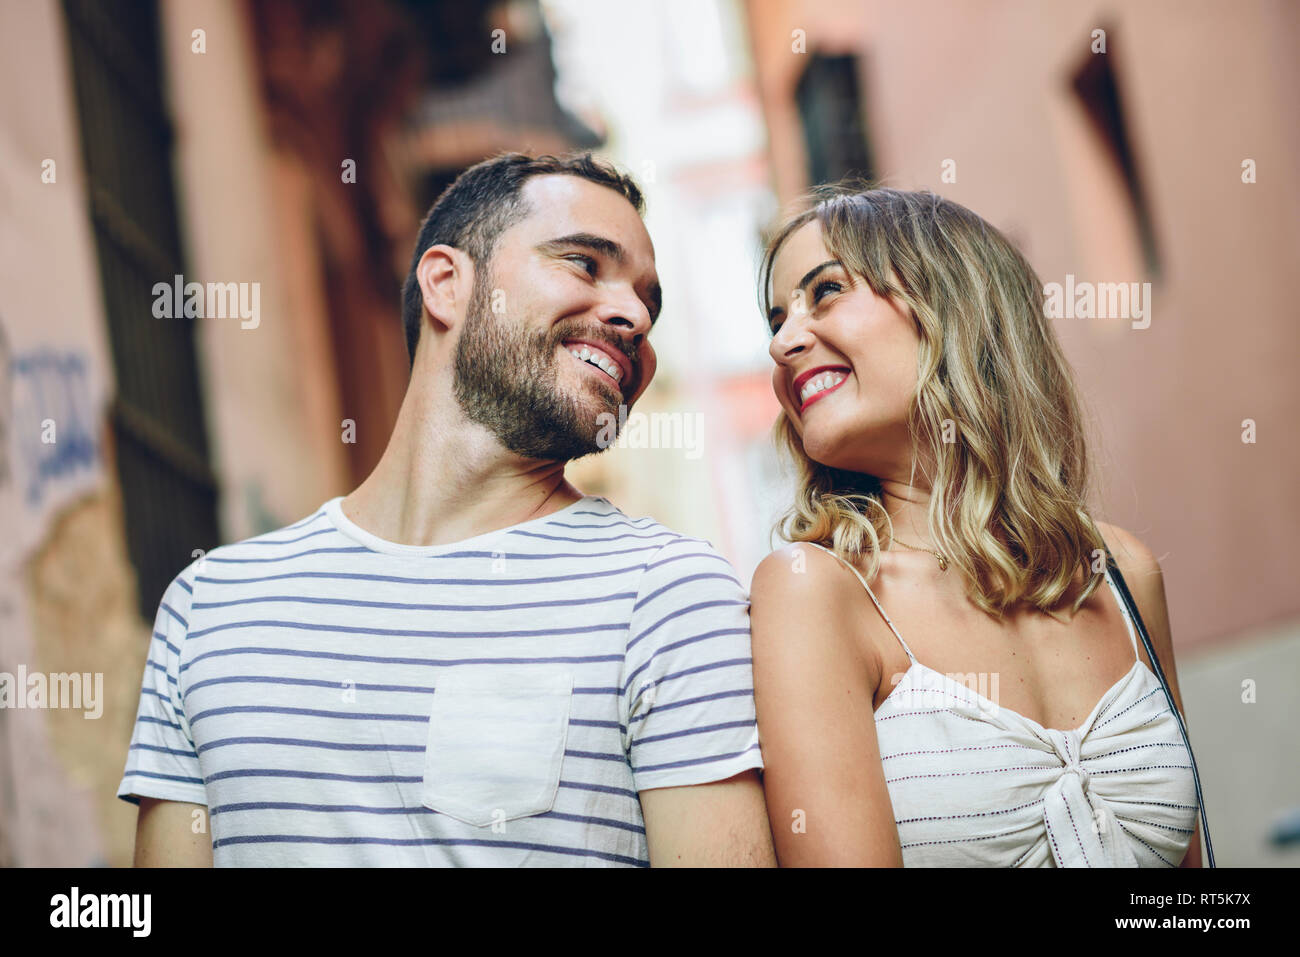 Spain, Andalusia, Malaga, happy tourist couple looking at each other in the city Stock Photo